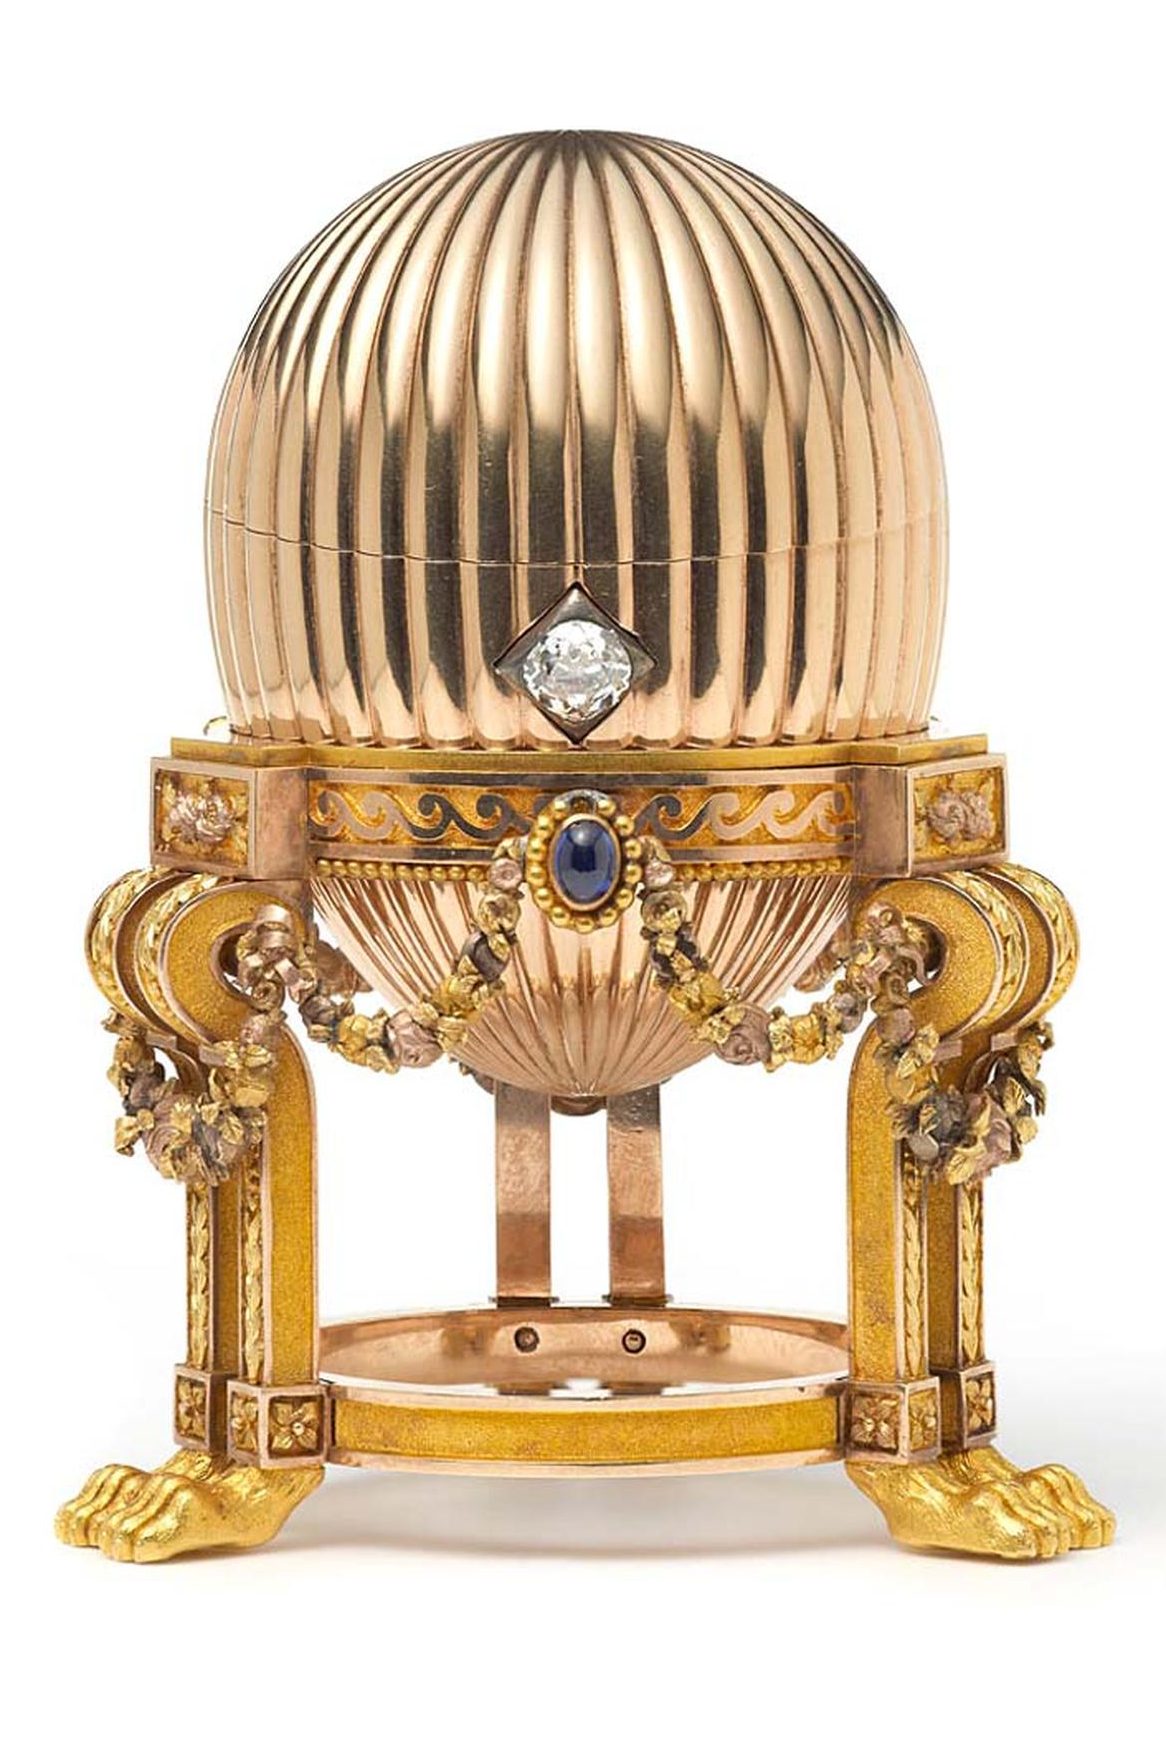 The image is a gold and diamond encrusted egg on a stand. The egg is decorated with intricate patterns and has a large diamond on the side. The stand is also decorated with gold and diamonds.